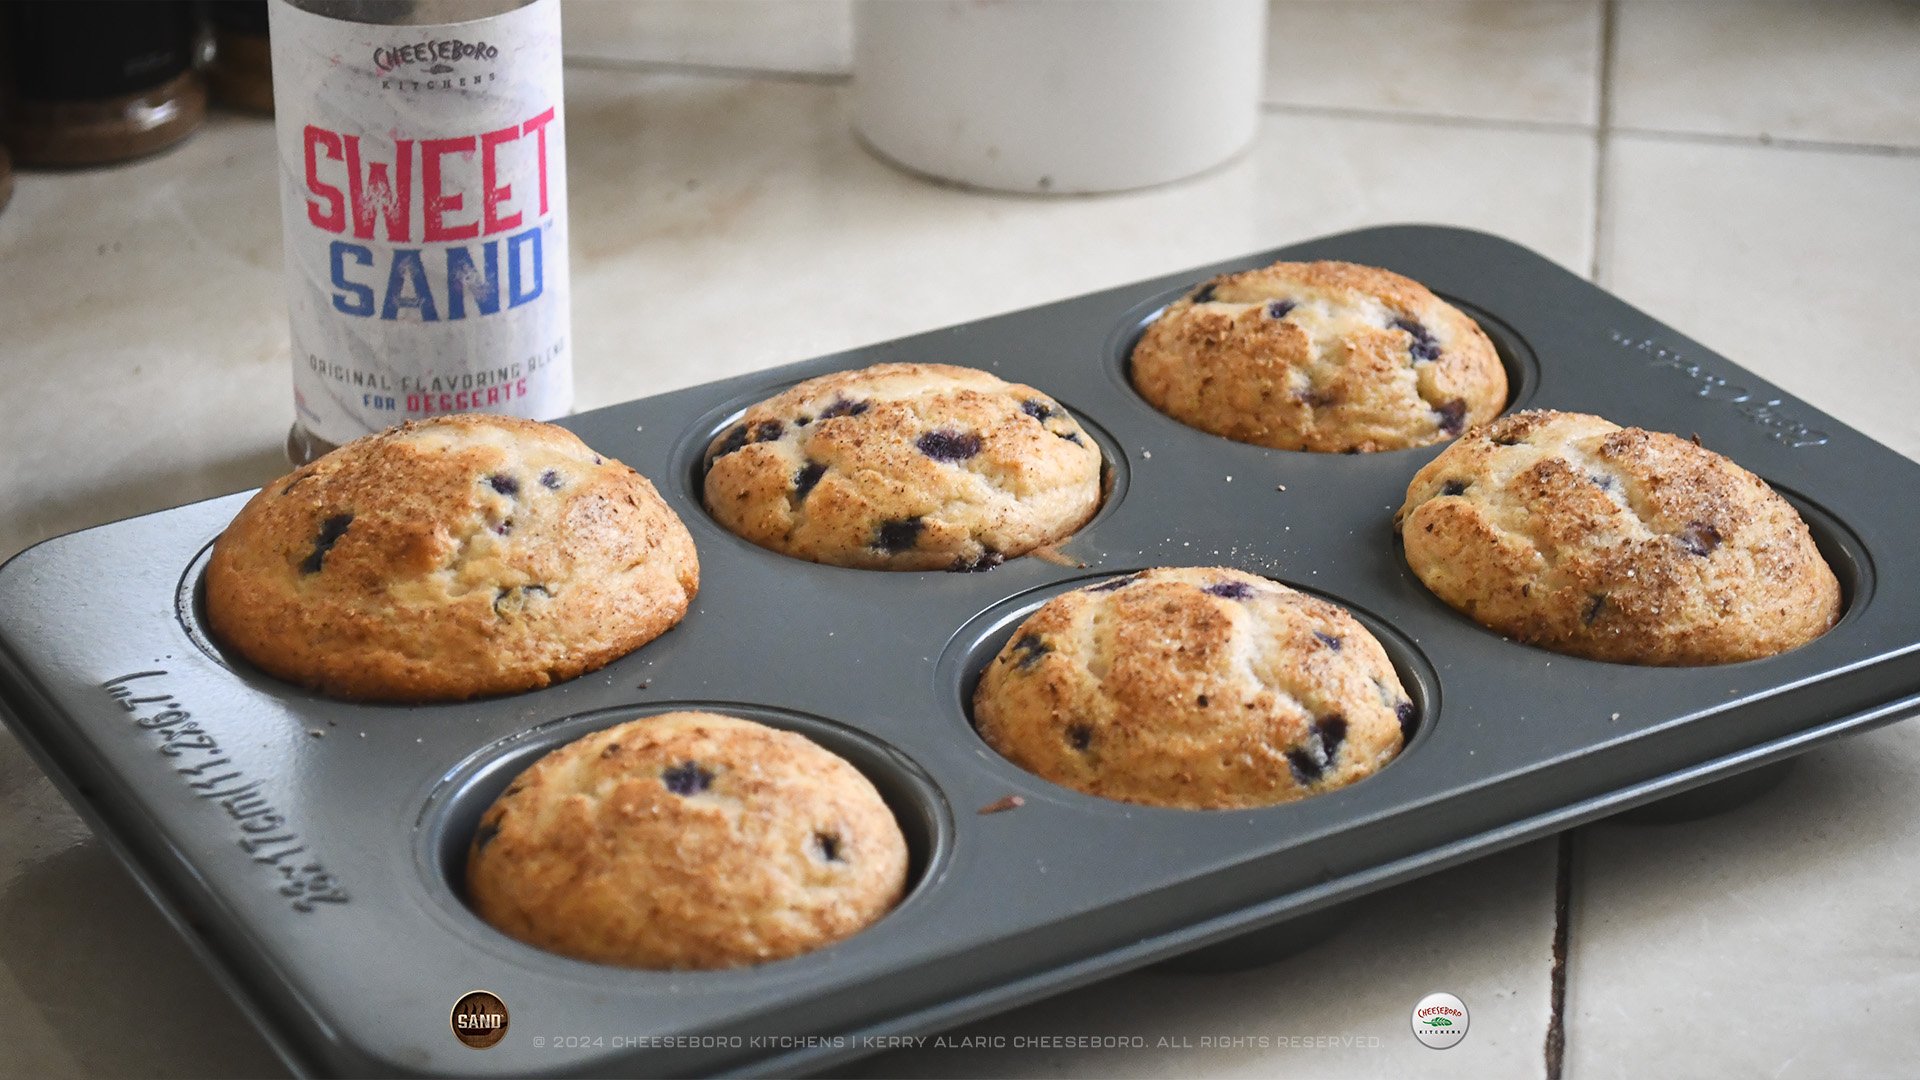 cheeskitch-240108-sands-sweet-banana-blueberry-muffins-in-pan-1-1920-hor.jpg